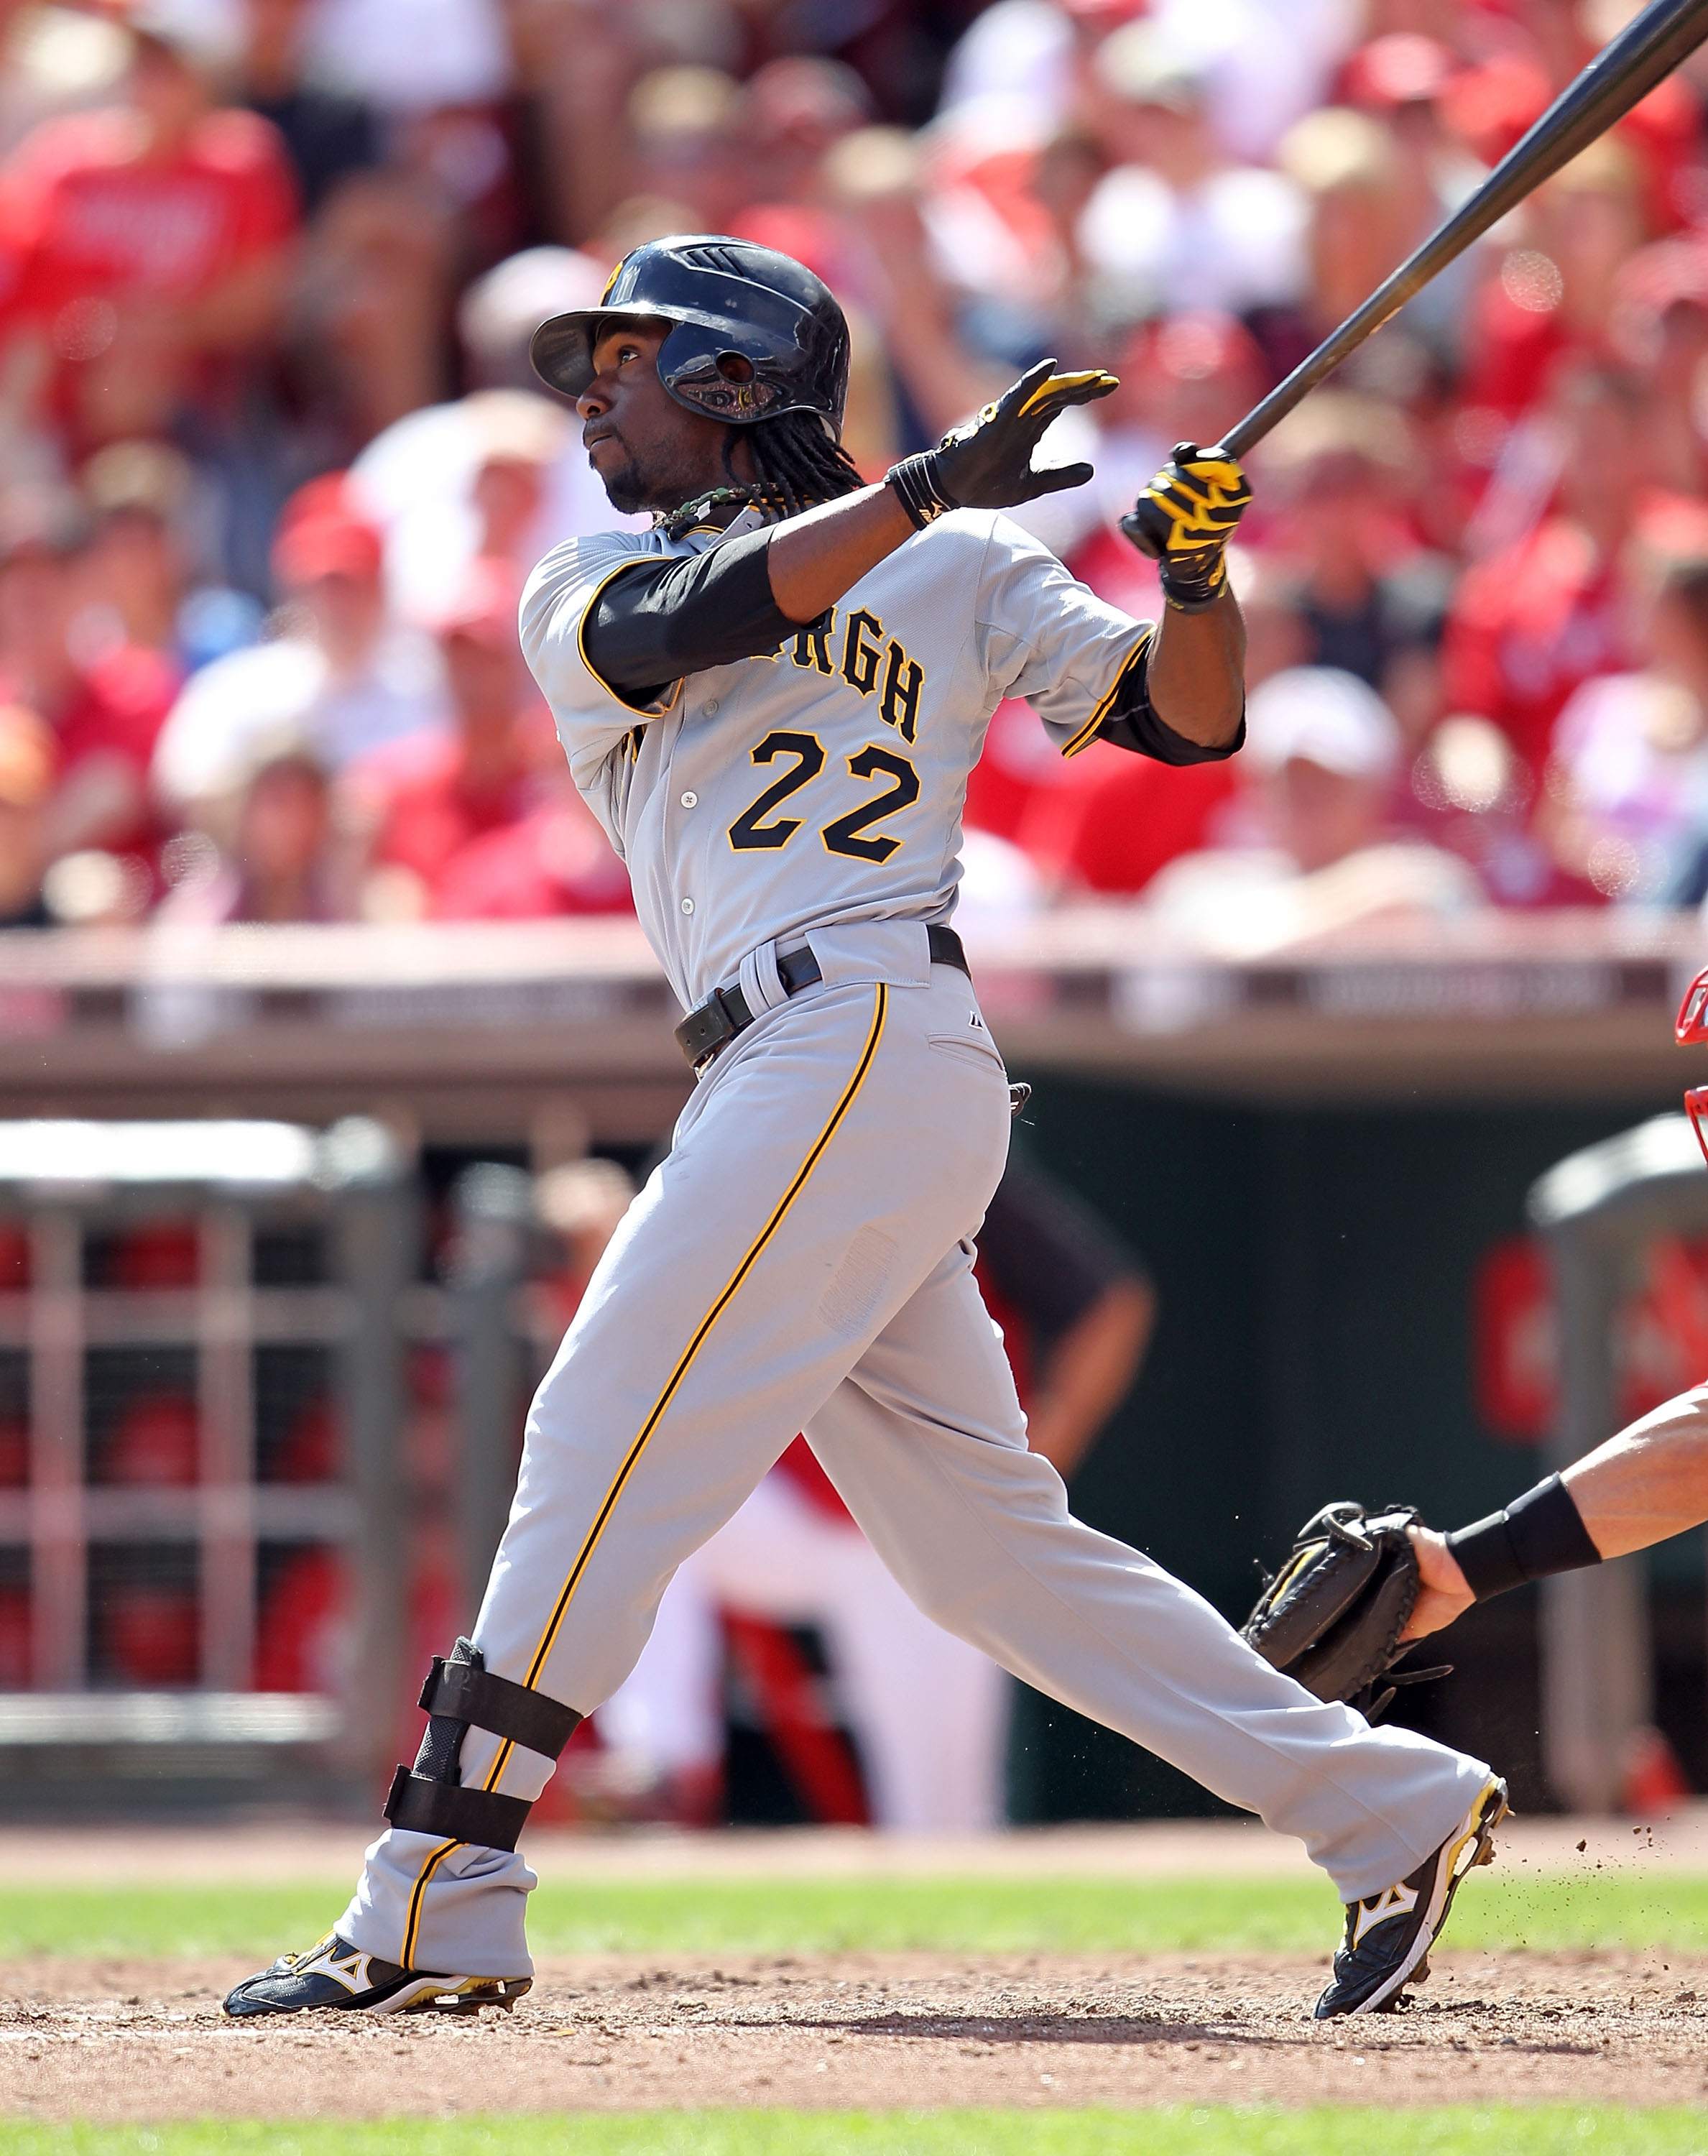 Bring him home: Why the Pirates should consider reuniting with Andrew  McCutchen - Bucs Dugout